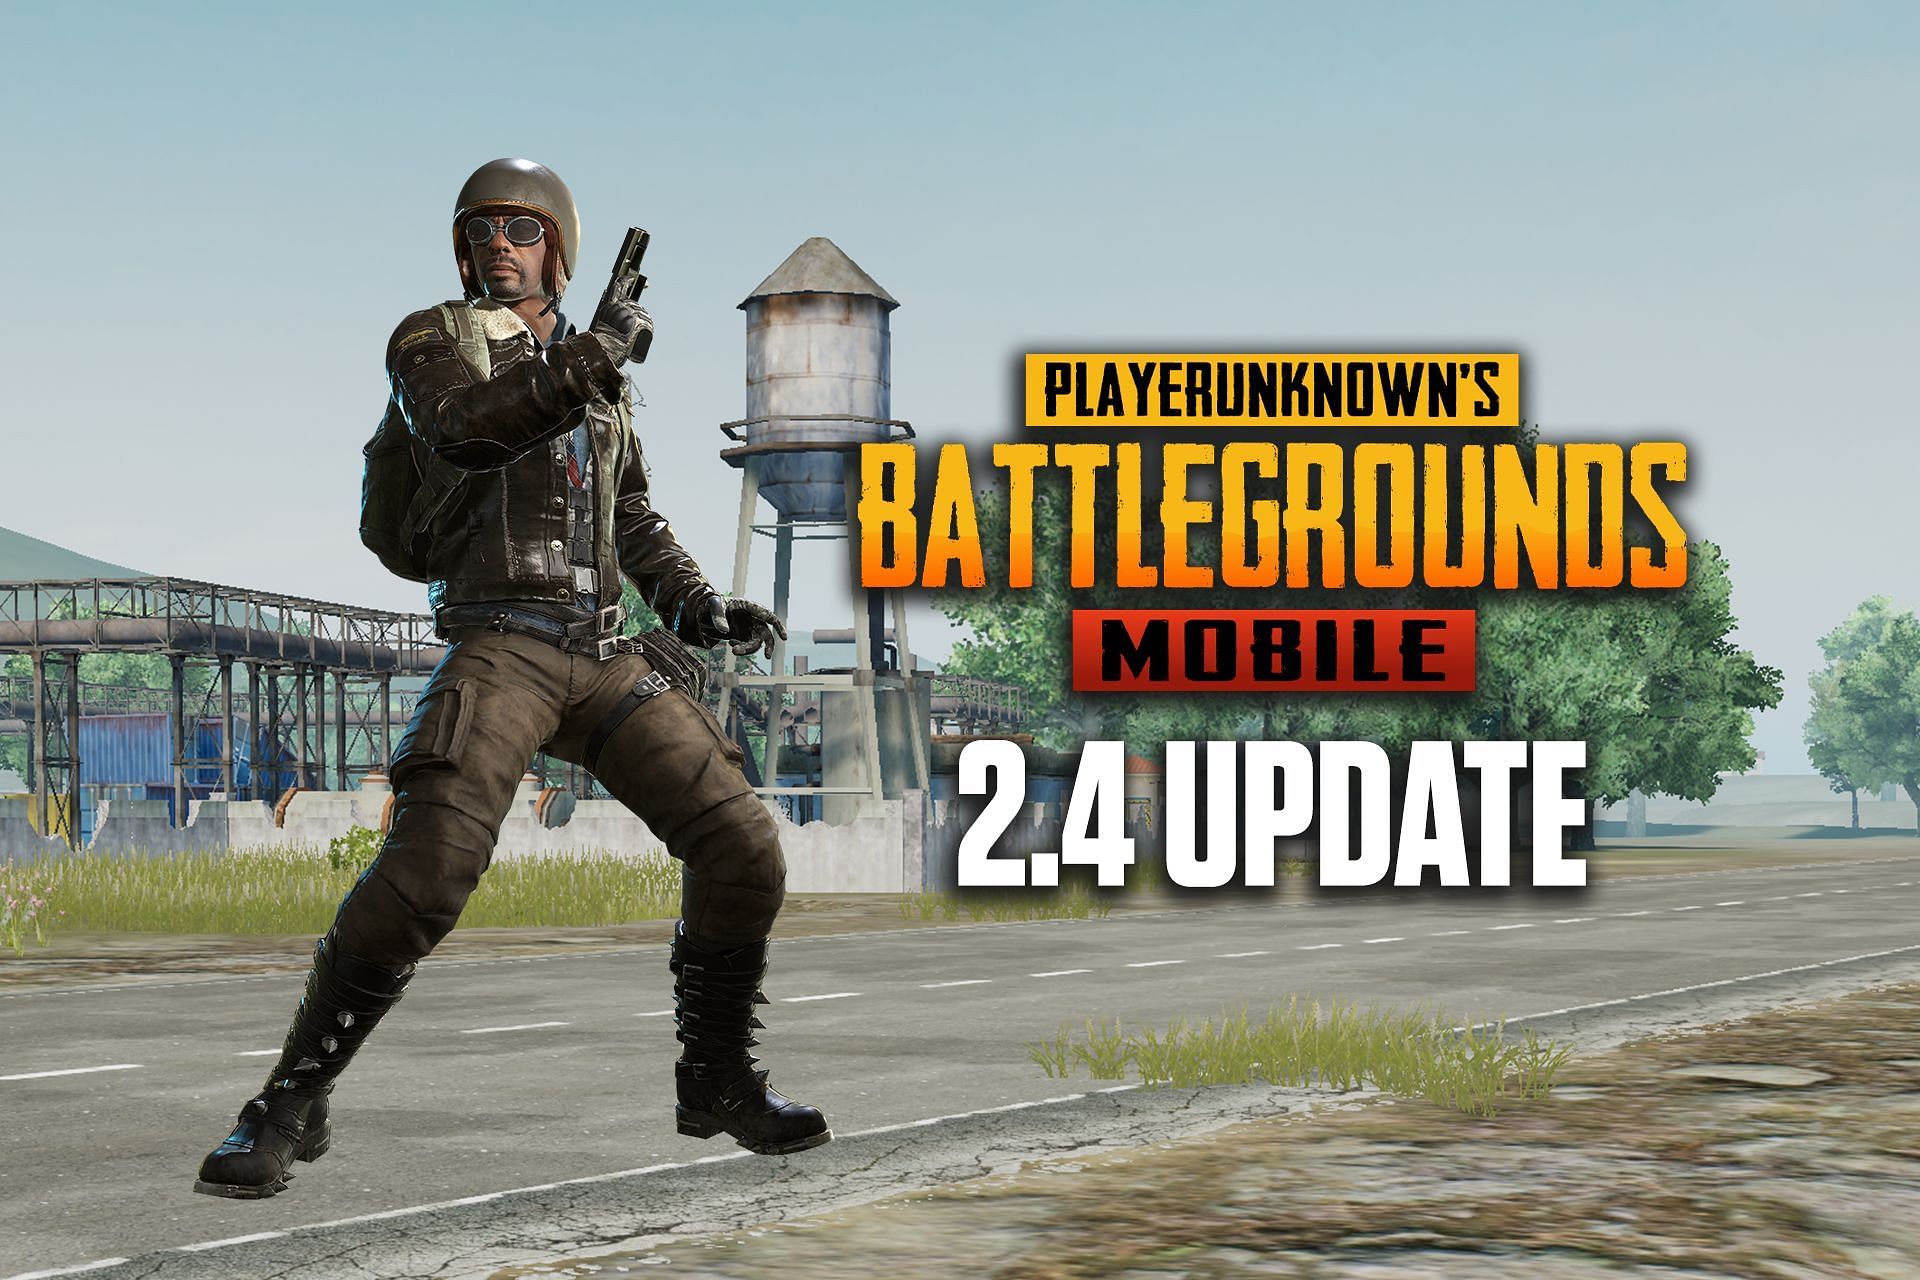 Download failed because you may not have purchased this app pubg mobile фото 98